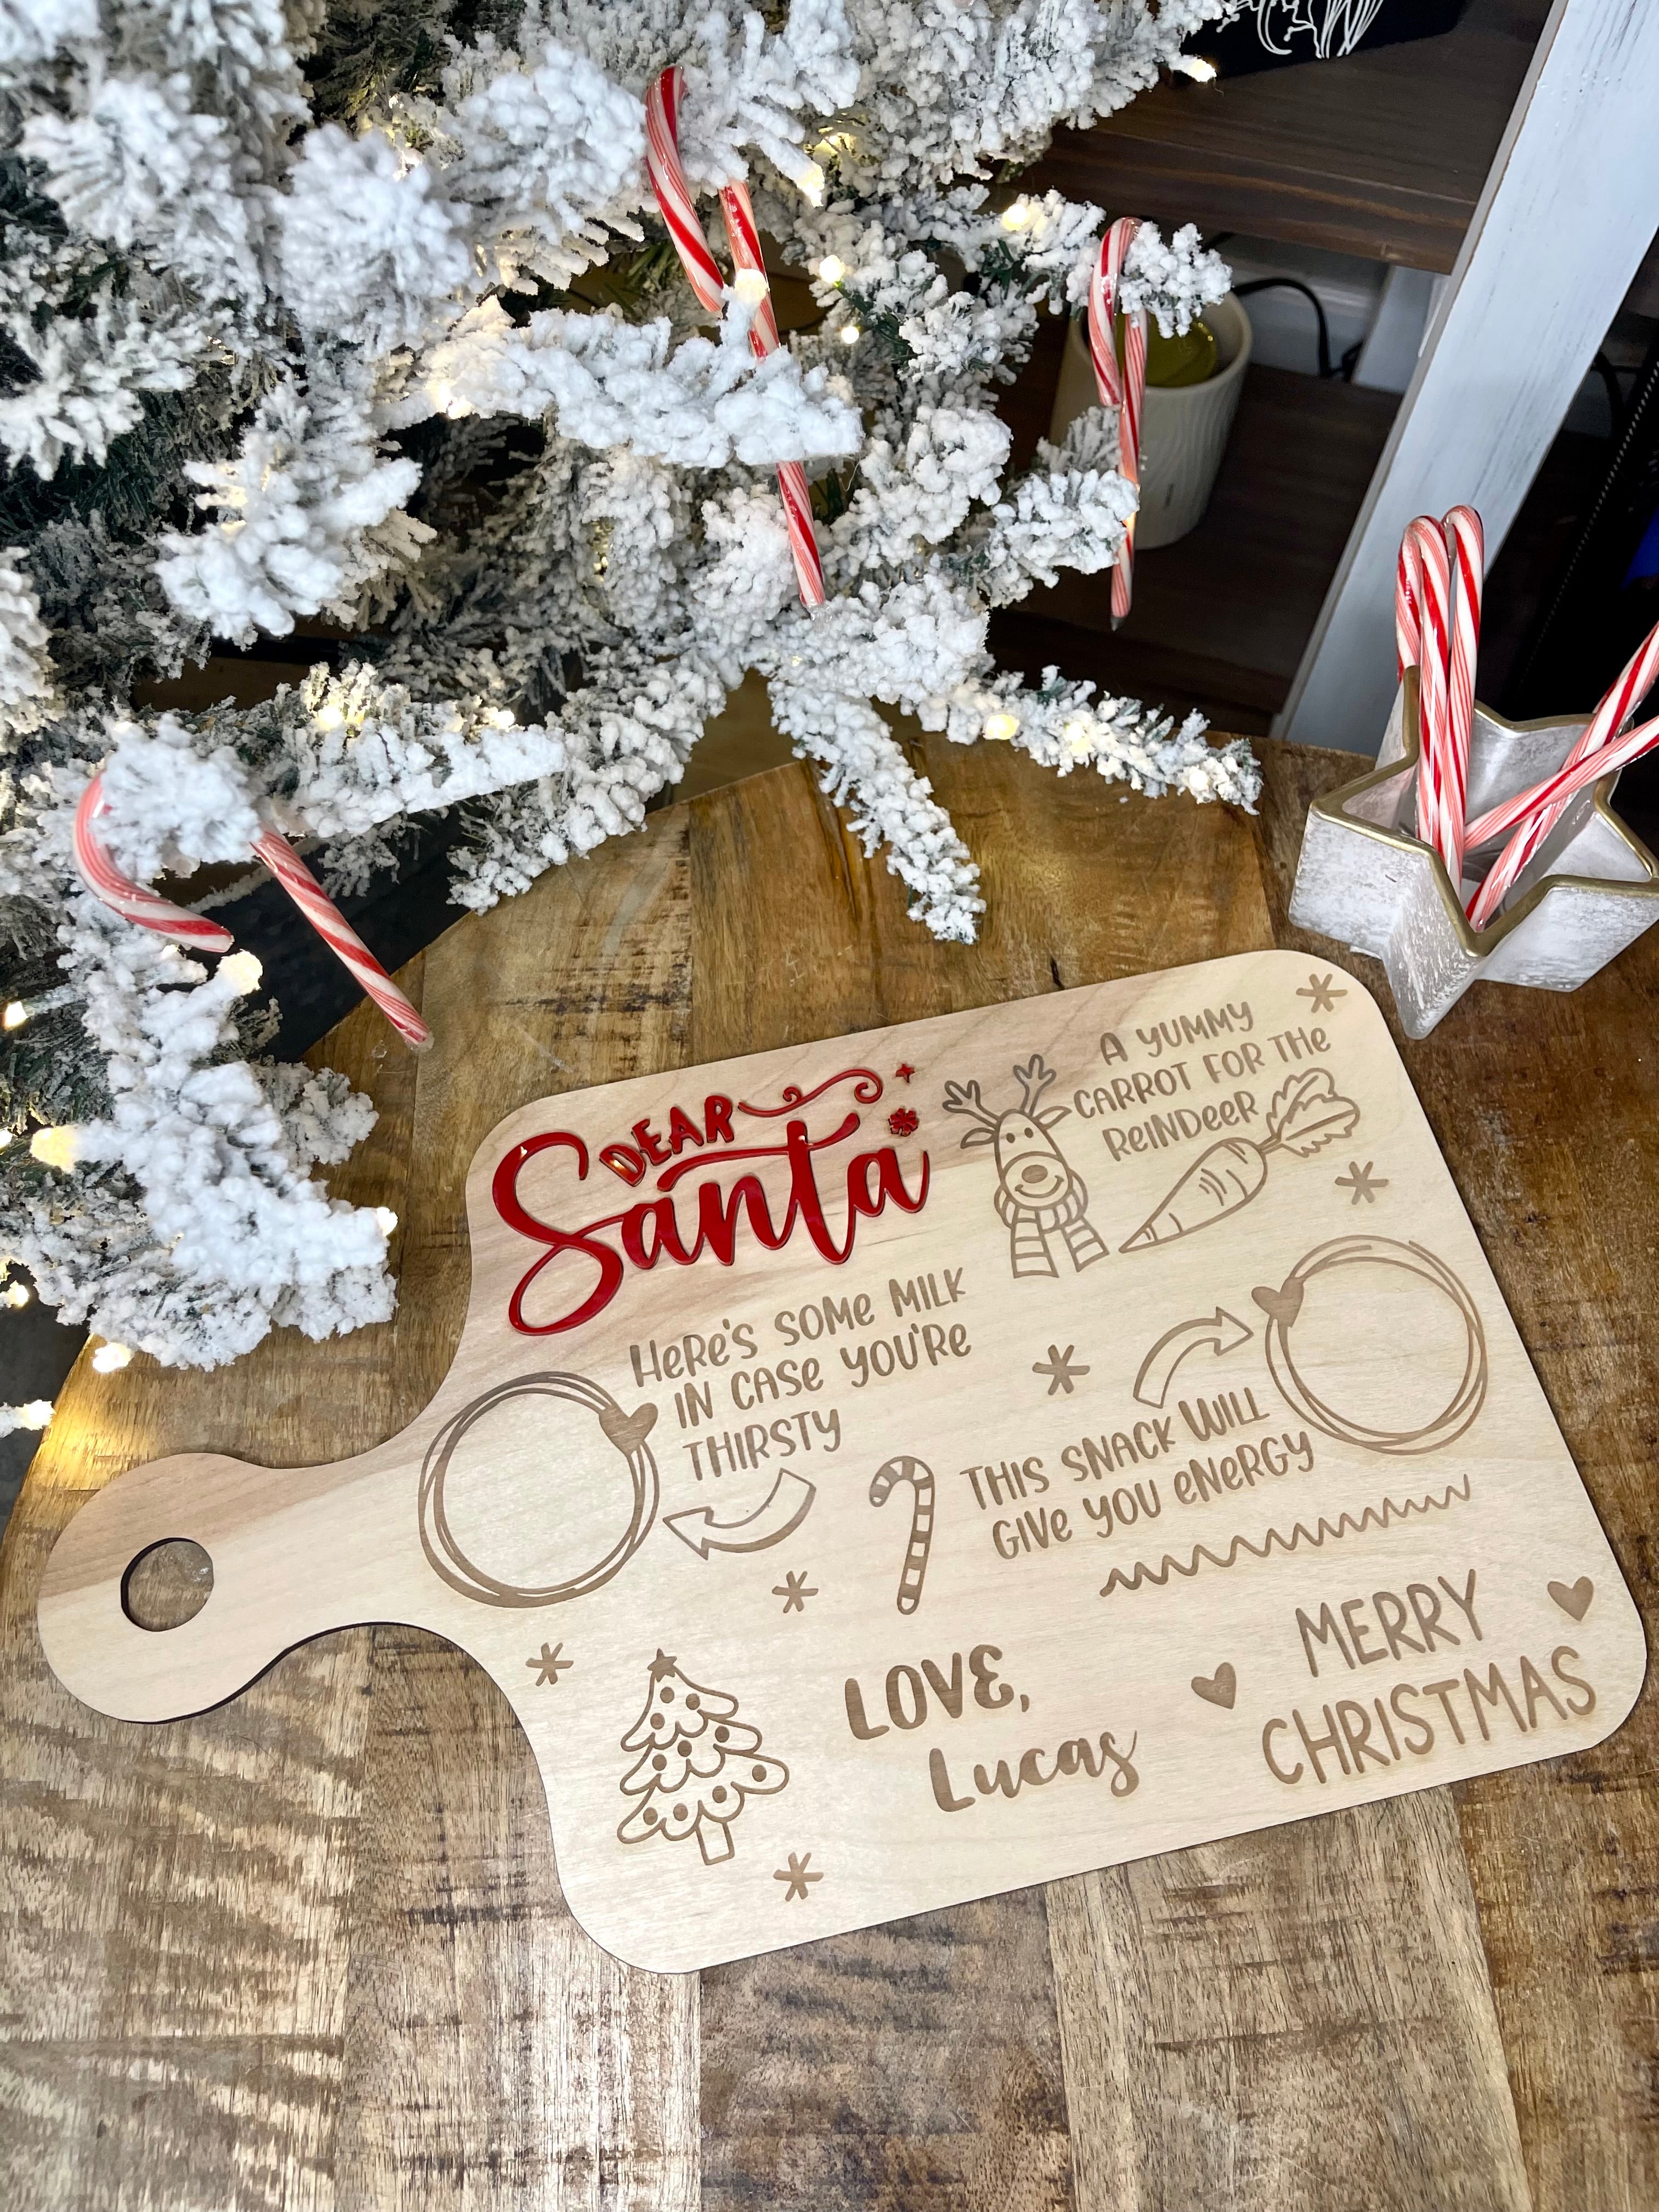 Santa’s milk and cookie tray, Personalized Dear Santa Milk & Cookie Tray, Personalized, Custom Santa's Cookie Tray